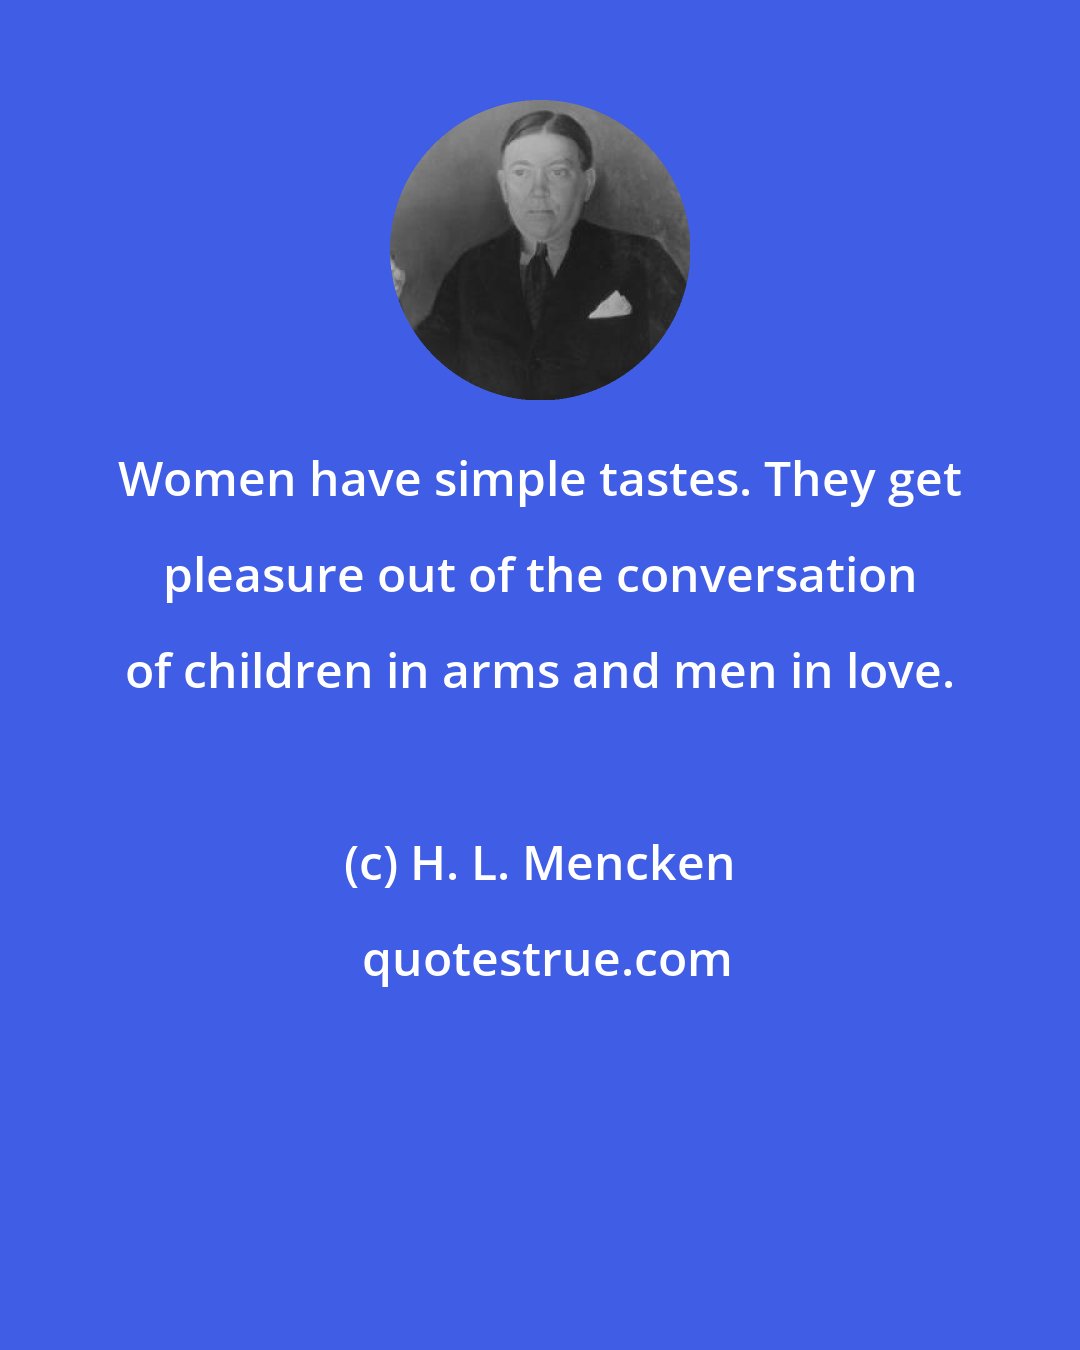 H. L. Mencken: Women have simple tastes. They get pleasure out of the conversation of children in arms and men in love.